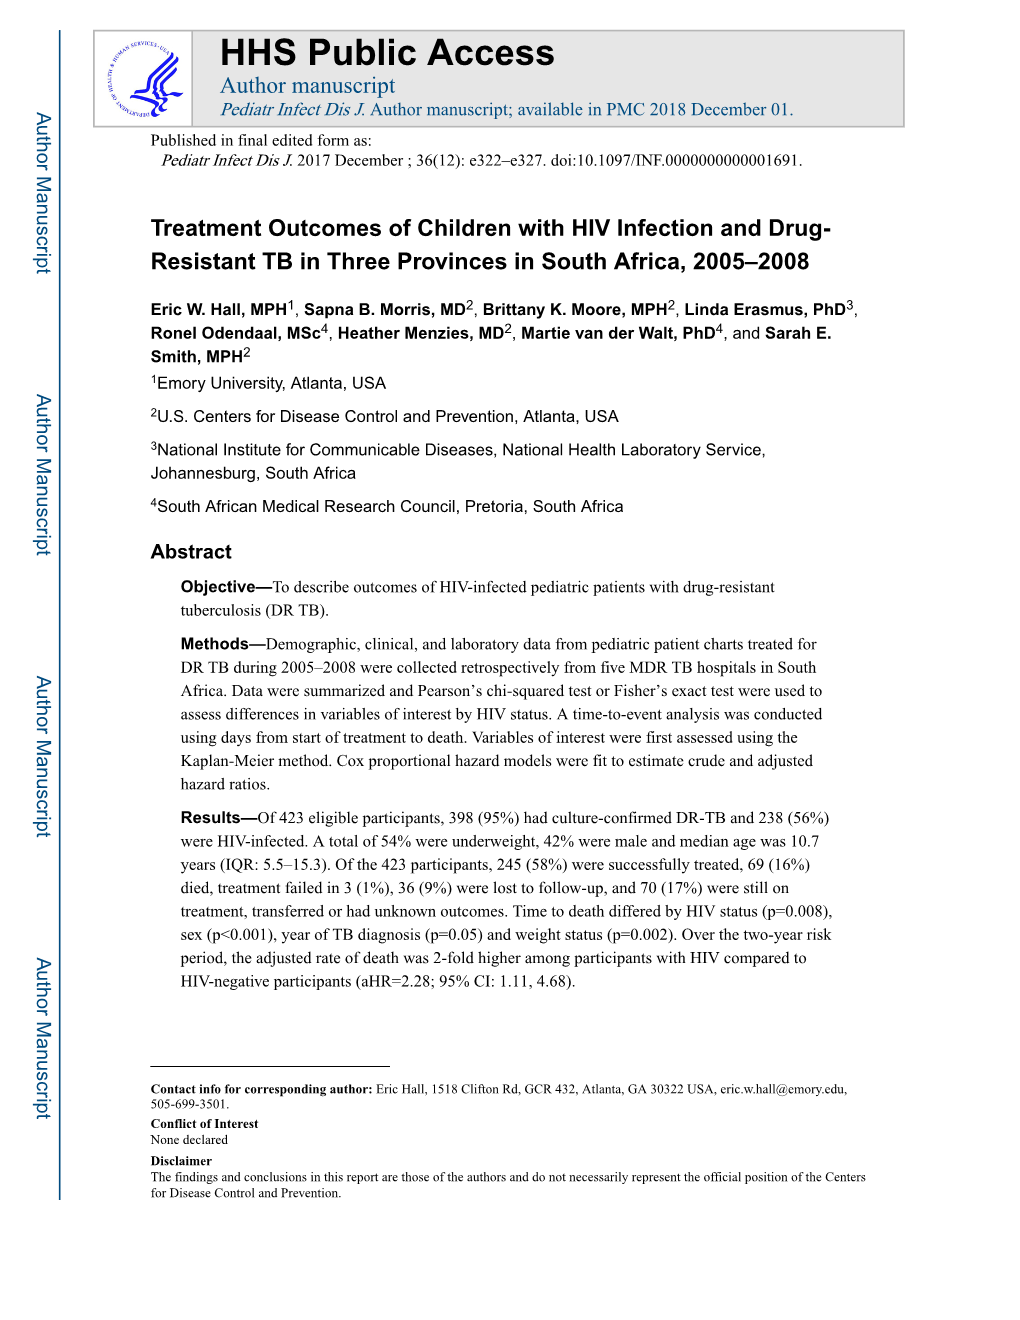 Treatment Outcomes of Children with HIV Infection and Drug-Resistant